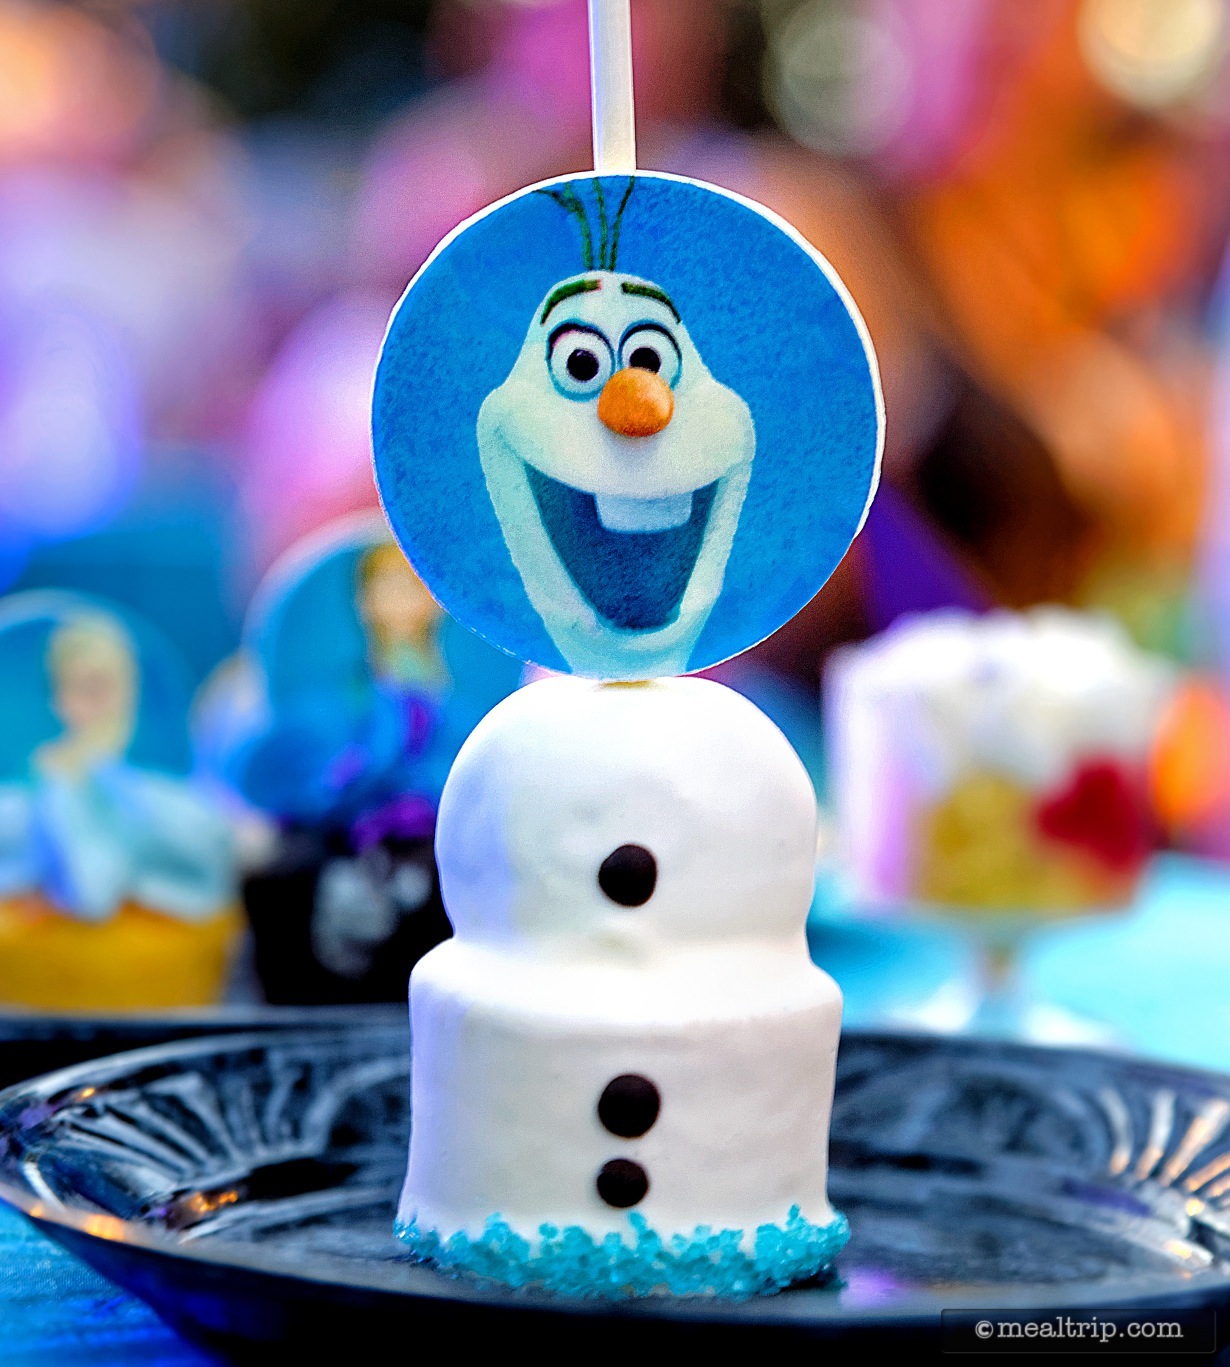 The Frozen Summer Fun Premium Package is Back for 2015